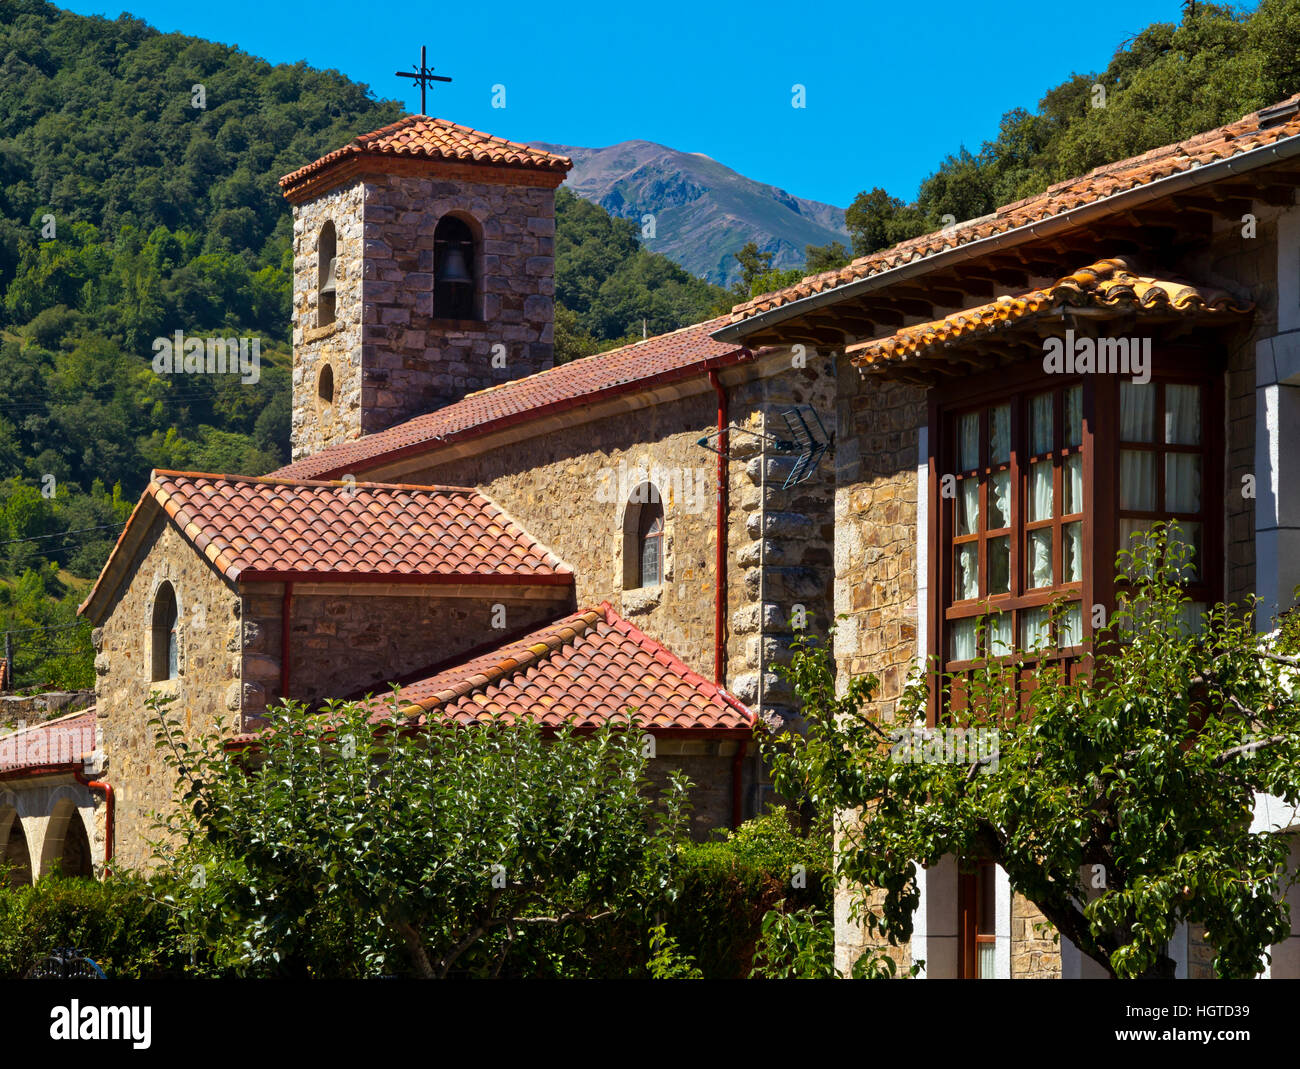 Traditional stone church in the village of Vega de Liebana in the Picos de Europa National Park in Cantabria northern Spain Stock Photo